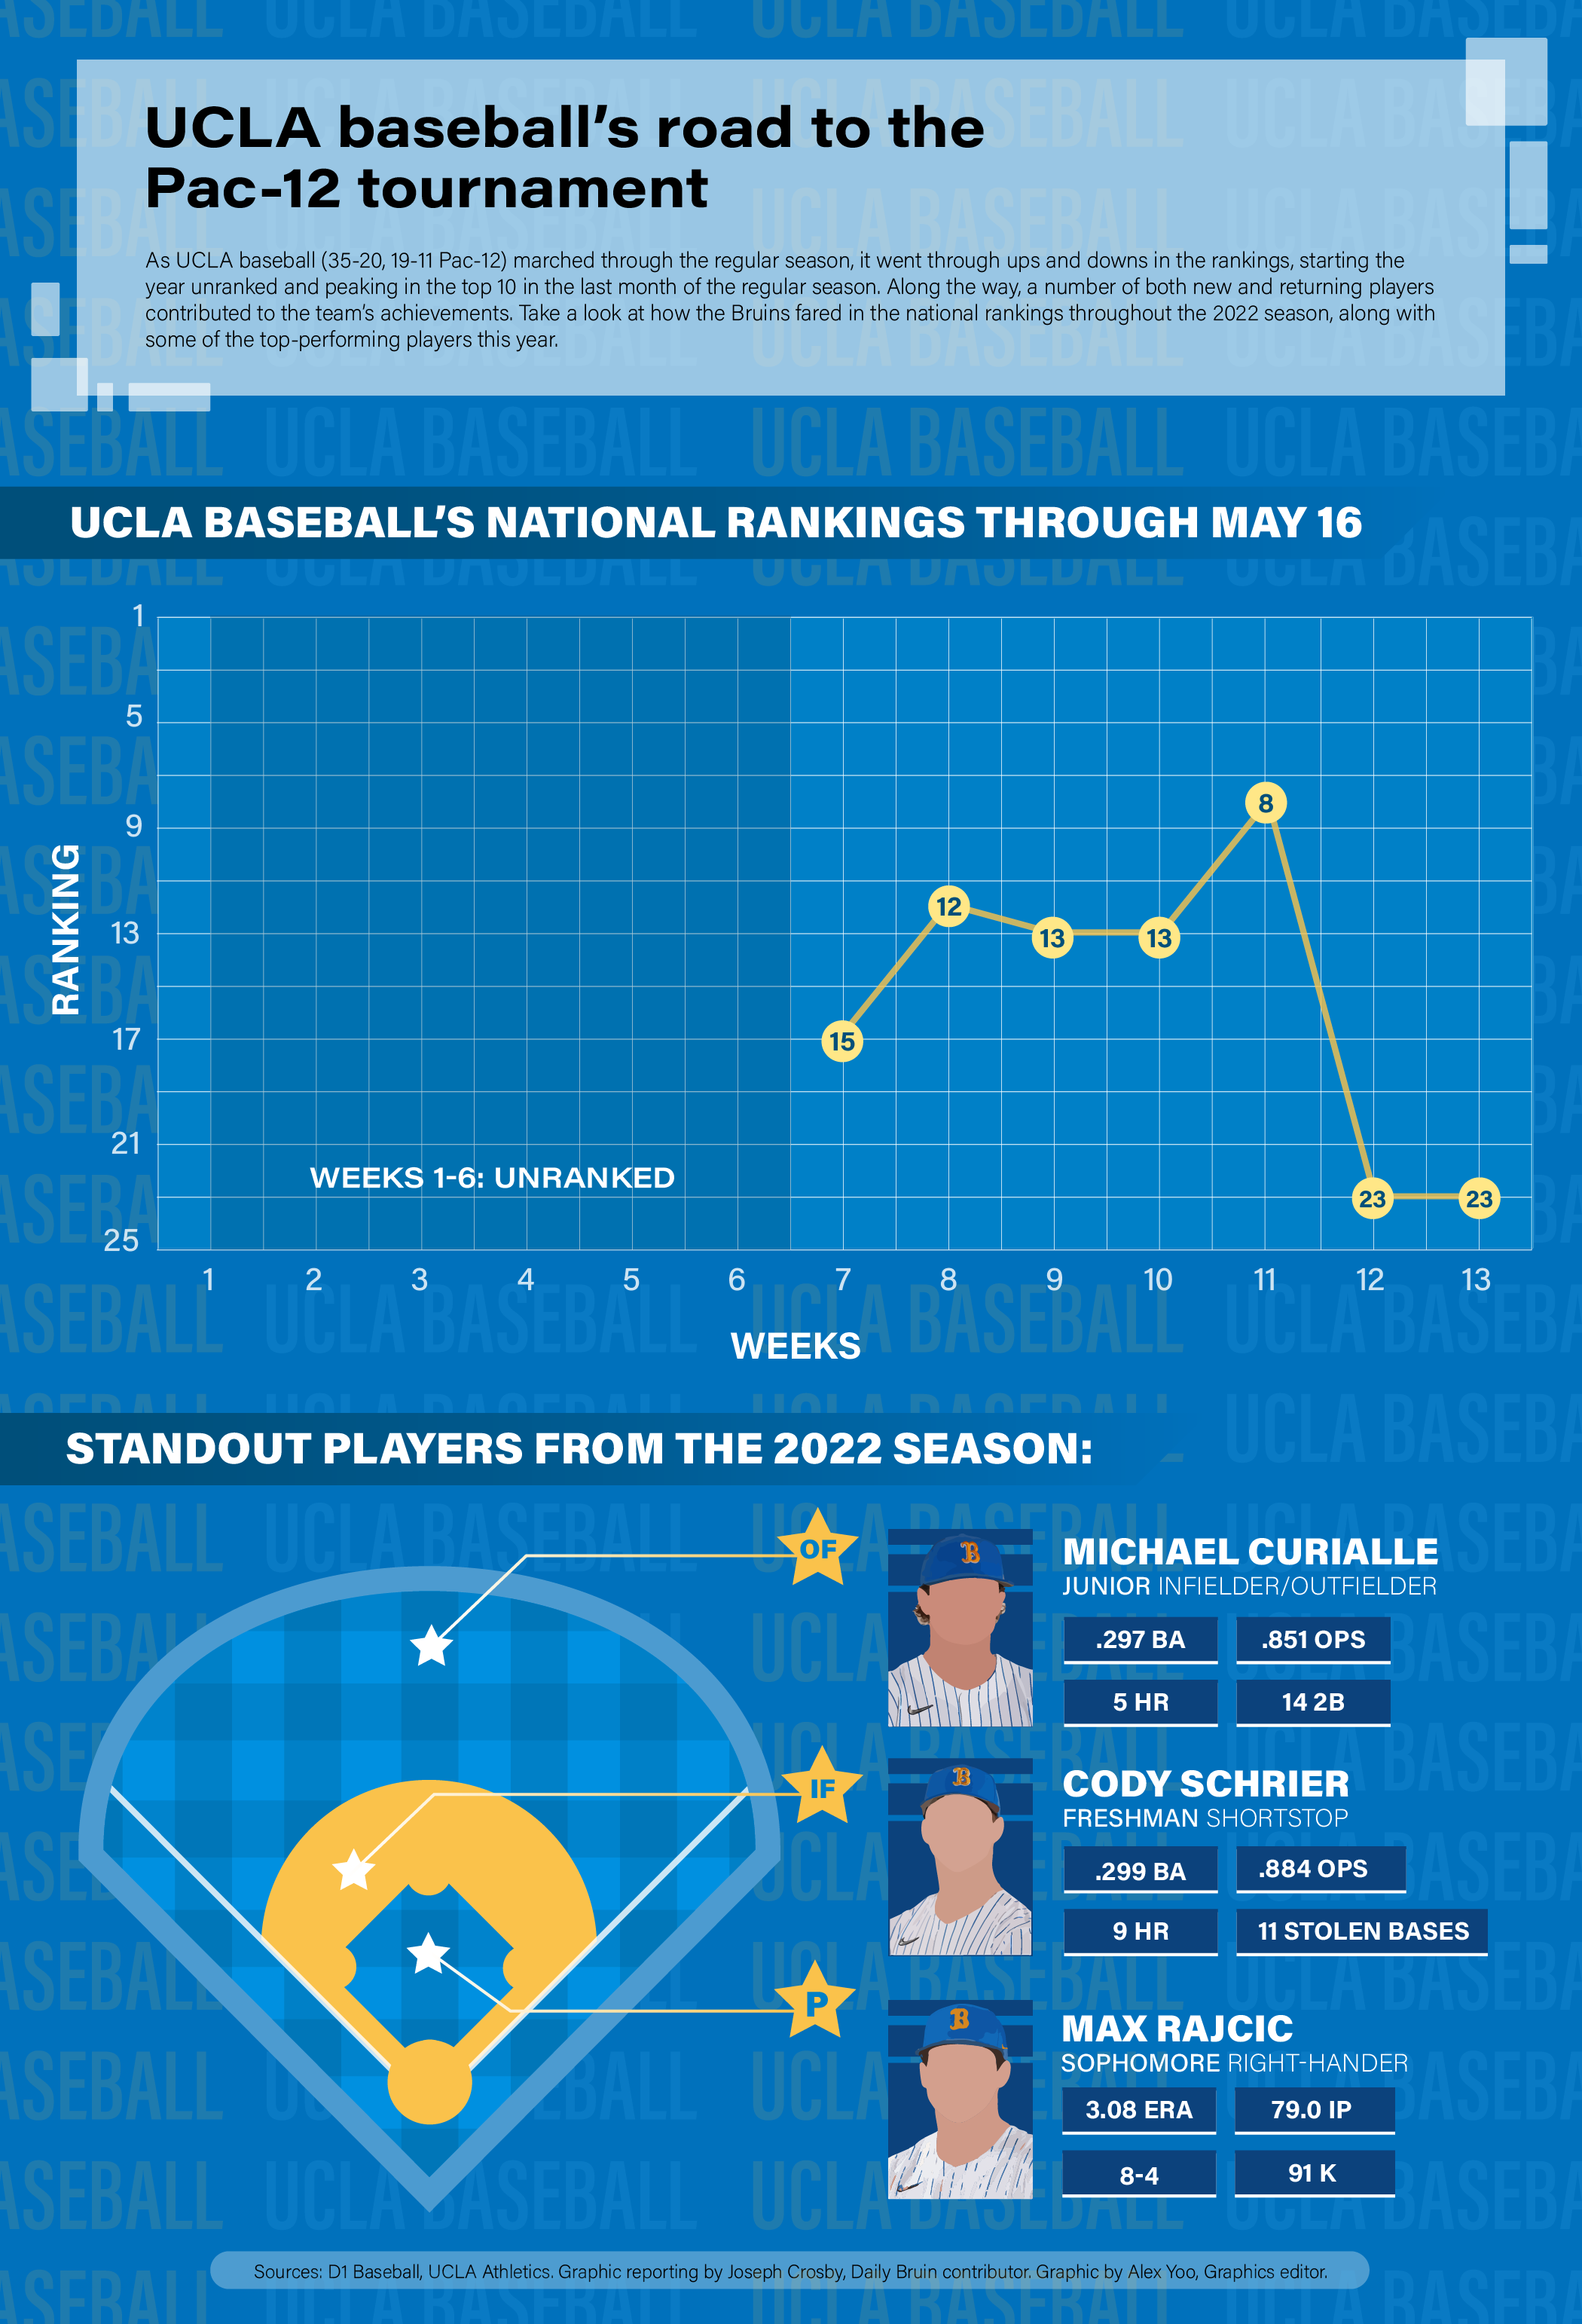 UCLA Baseball: Six weeks at no. 1 but Pac-12 foes are closing in